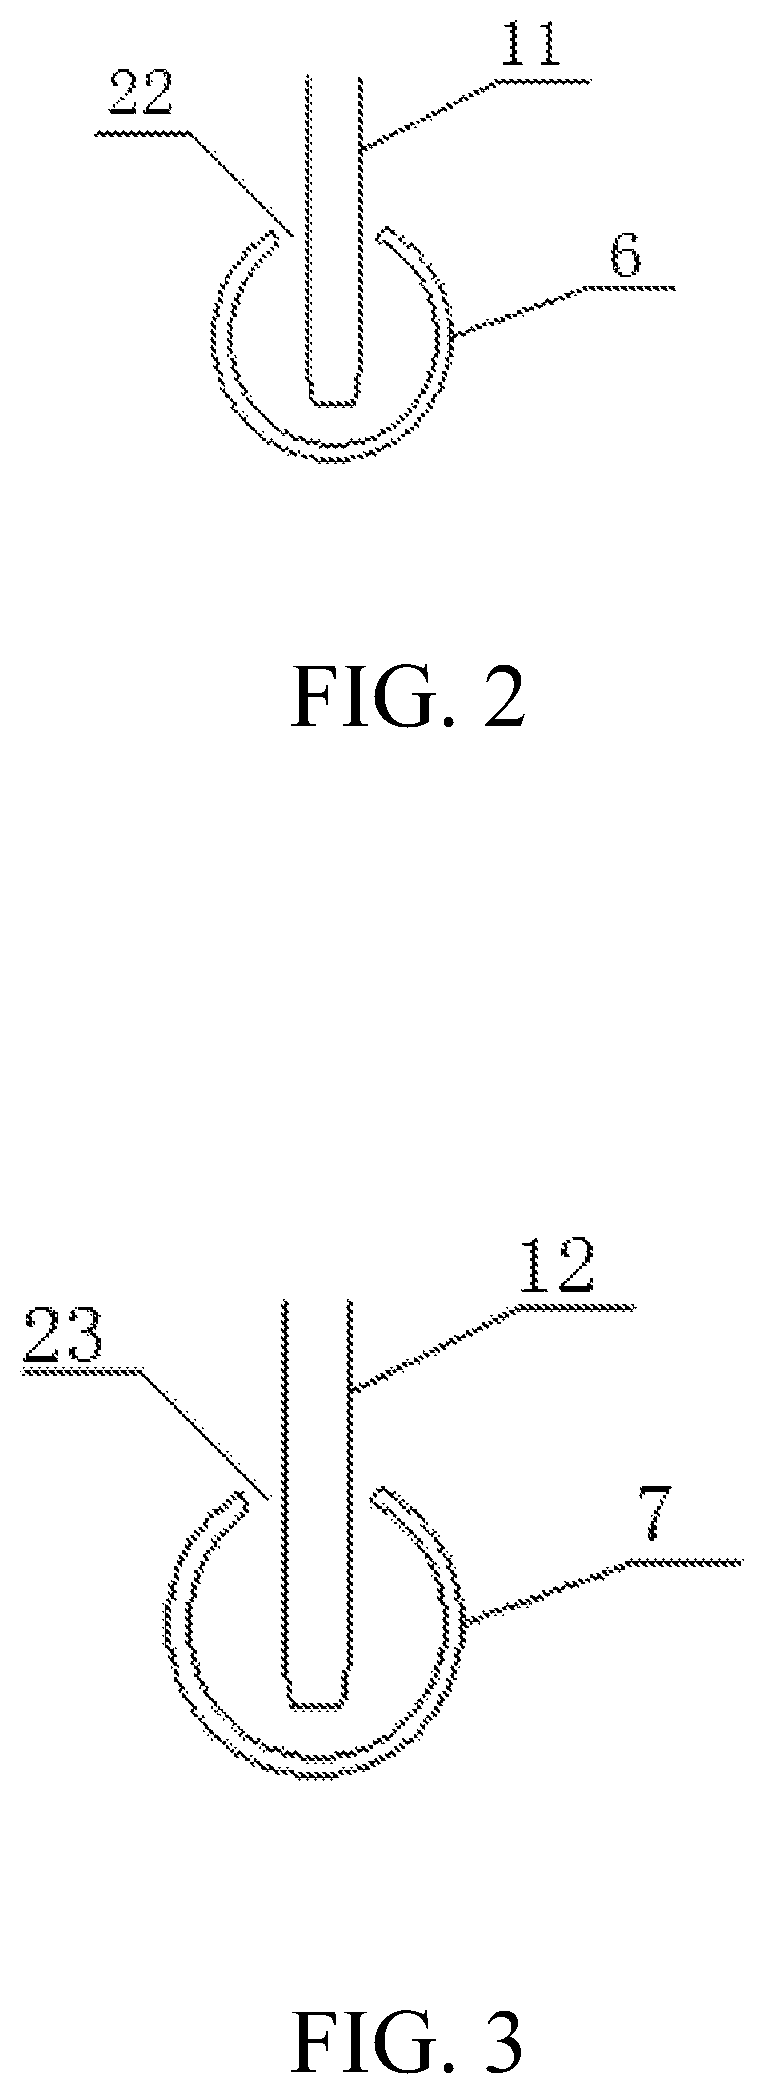 Implant coating and drying device